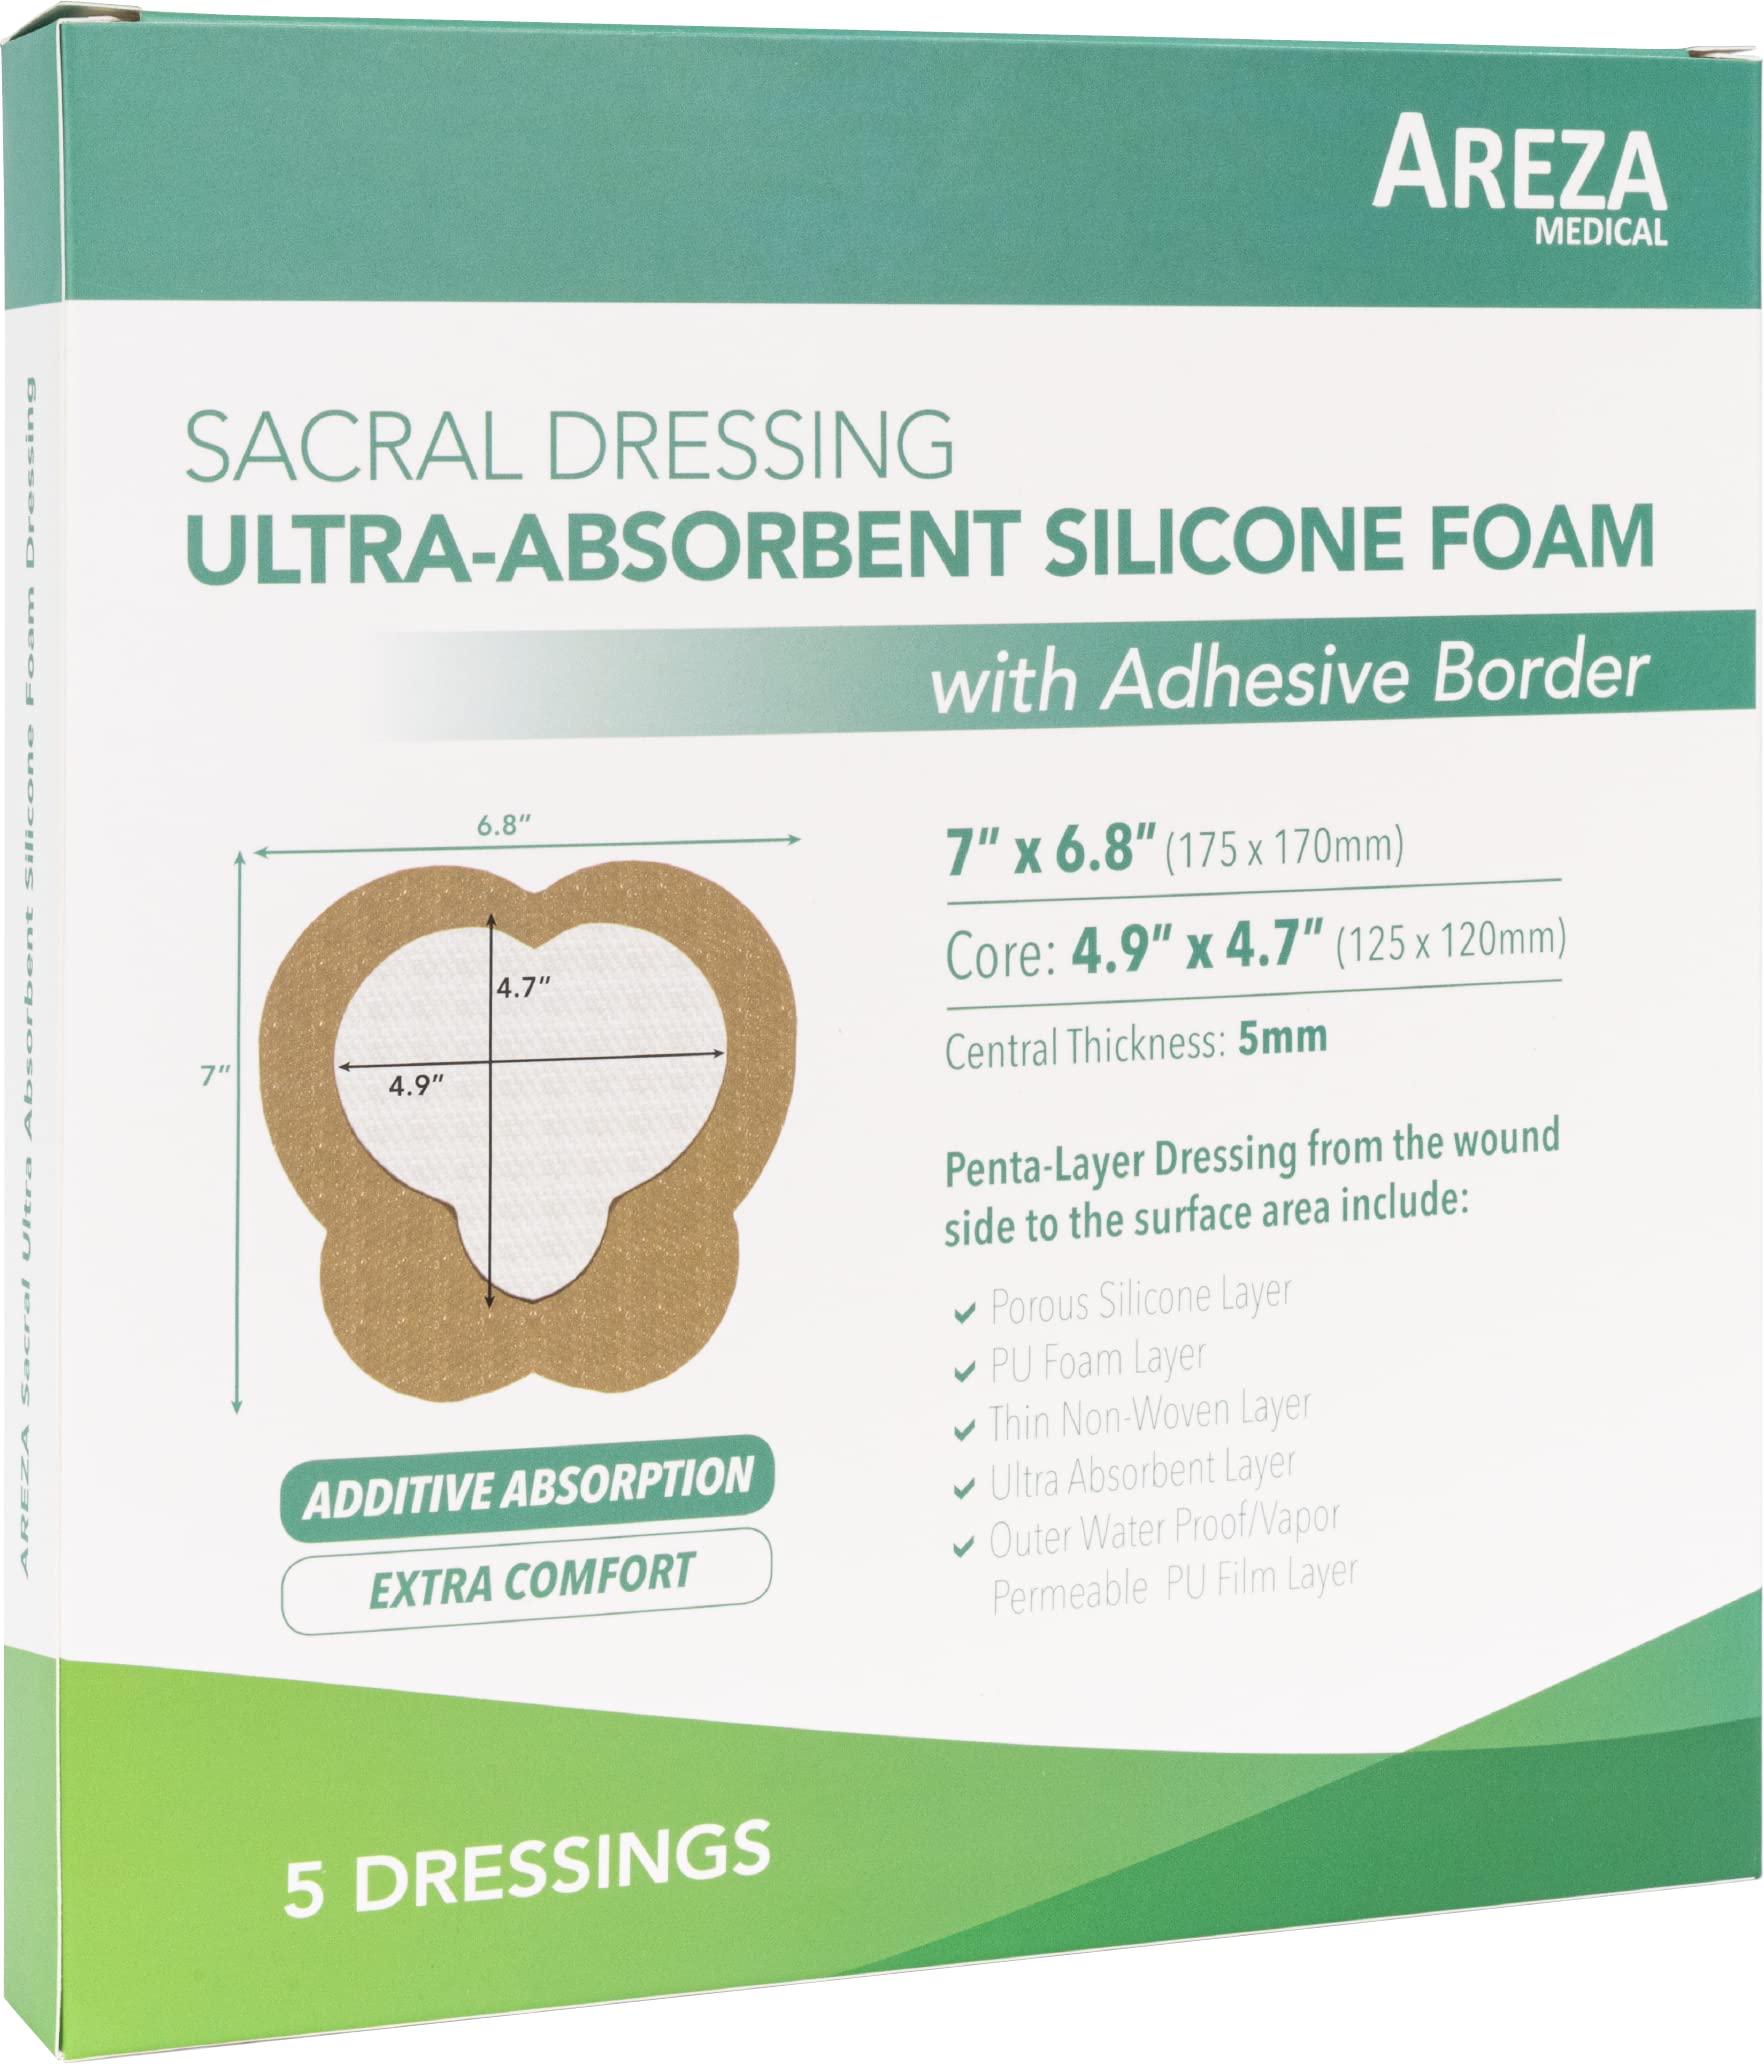 Areza Medical - Ultra-Absorbent Silicone Foam Wound Dressing - Waterproof - with Adhesive Border - sterile - designed for Sacral Wounds - 7" X 6.8" - 5 PCS Per Box